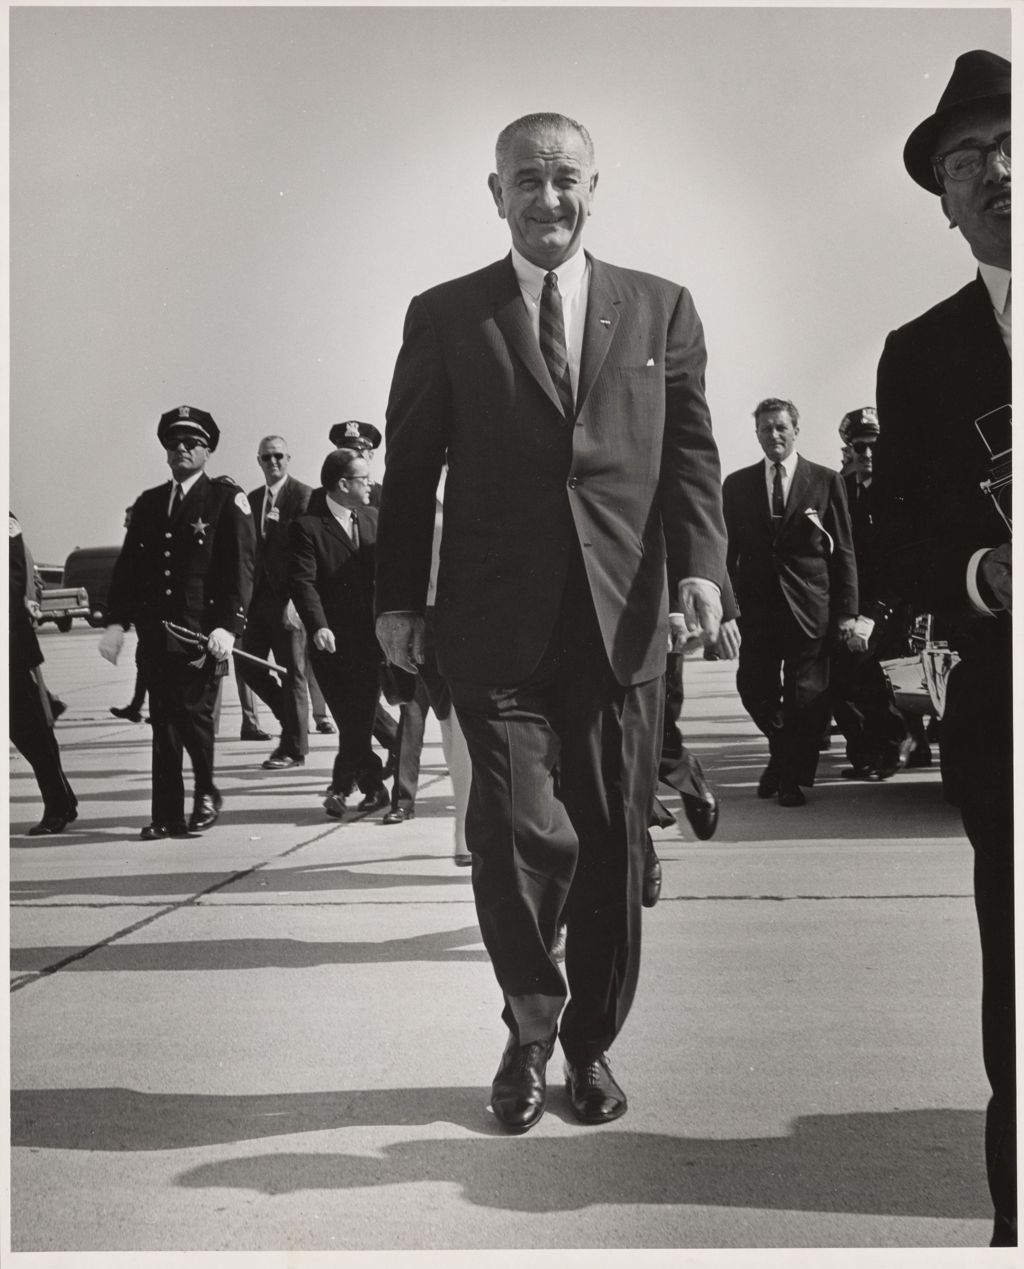 Lyndon B. Johnson at the airport in Chicago